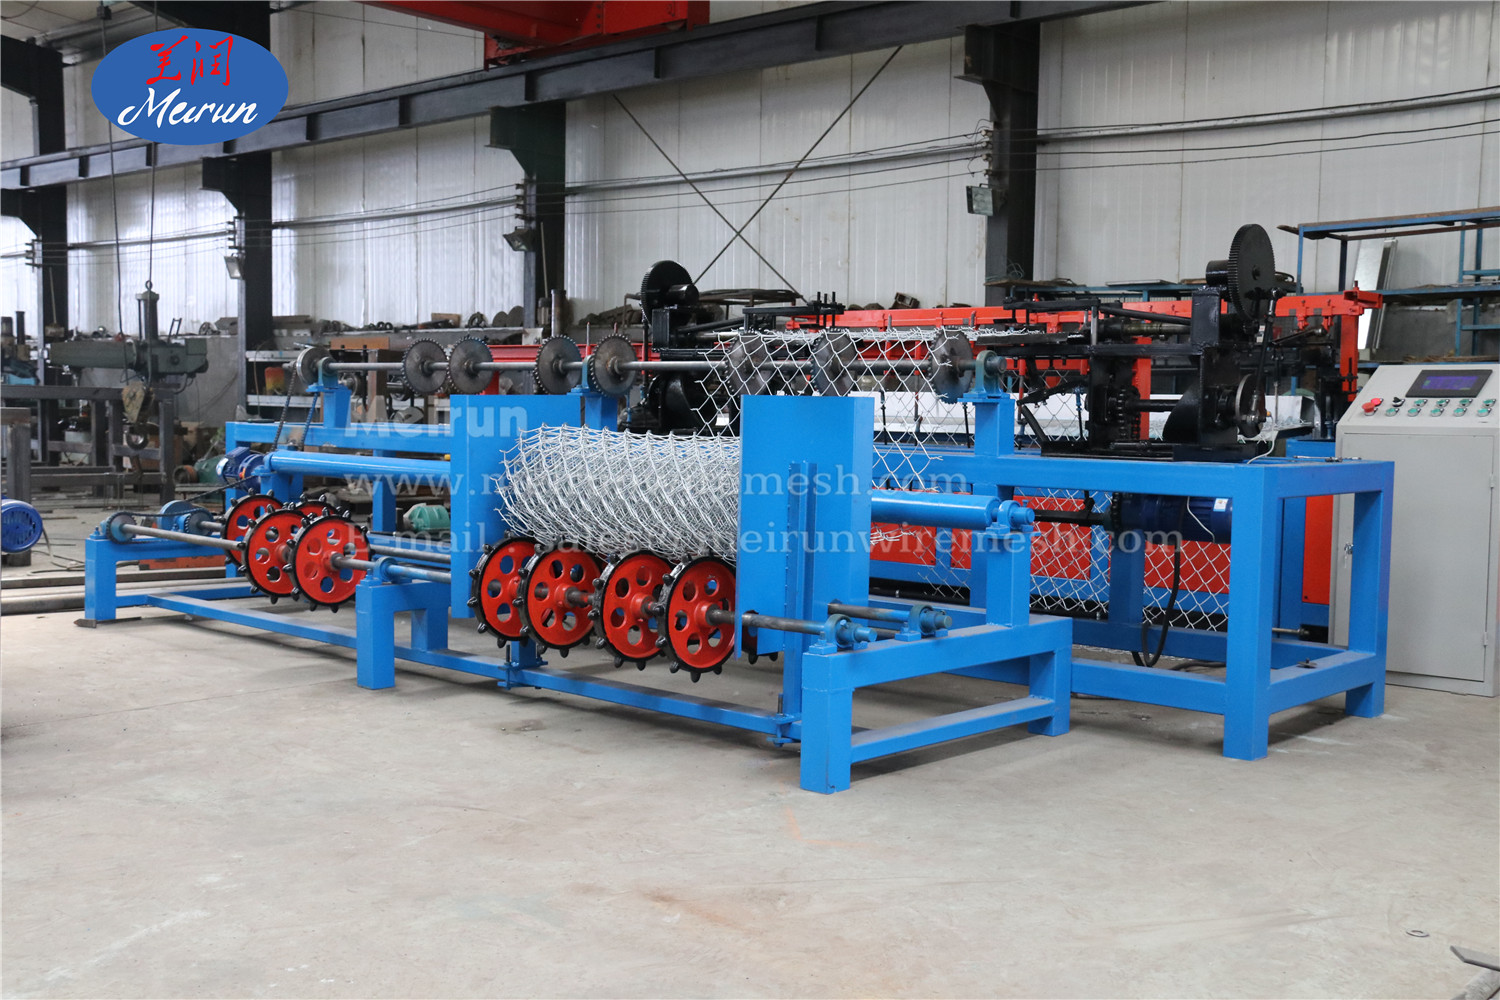 China Automatic Hurricanes Chain Link Fence Machine Supplier